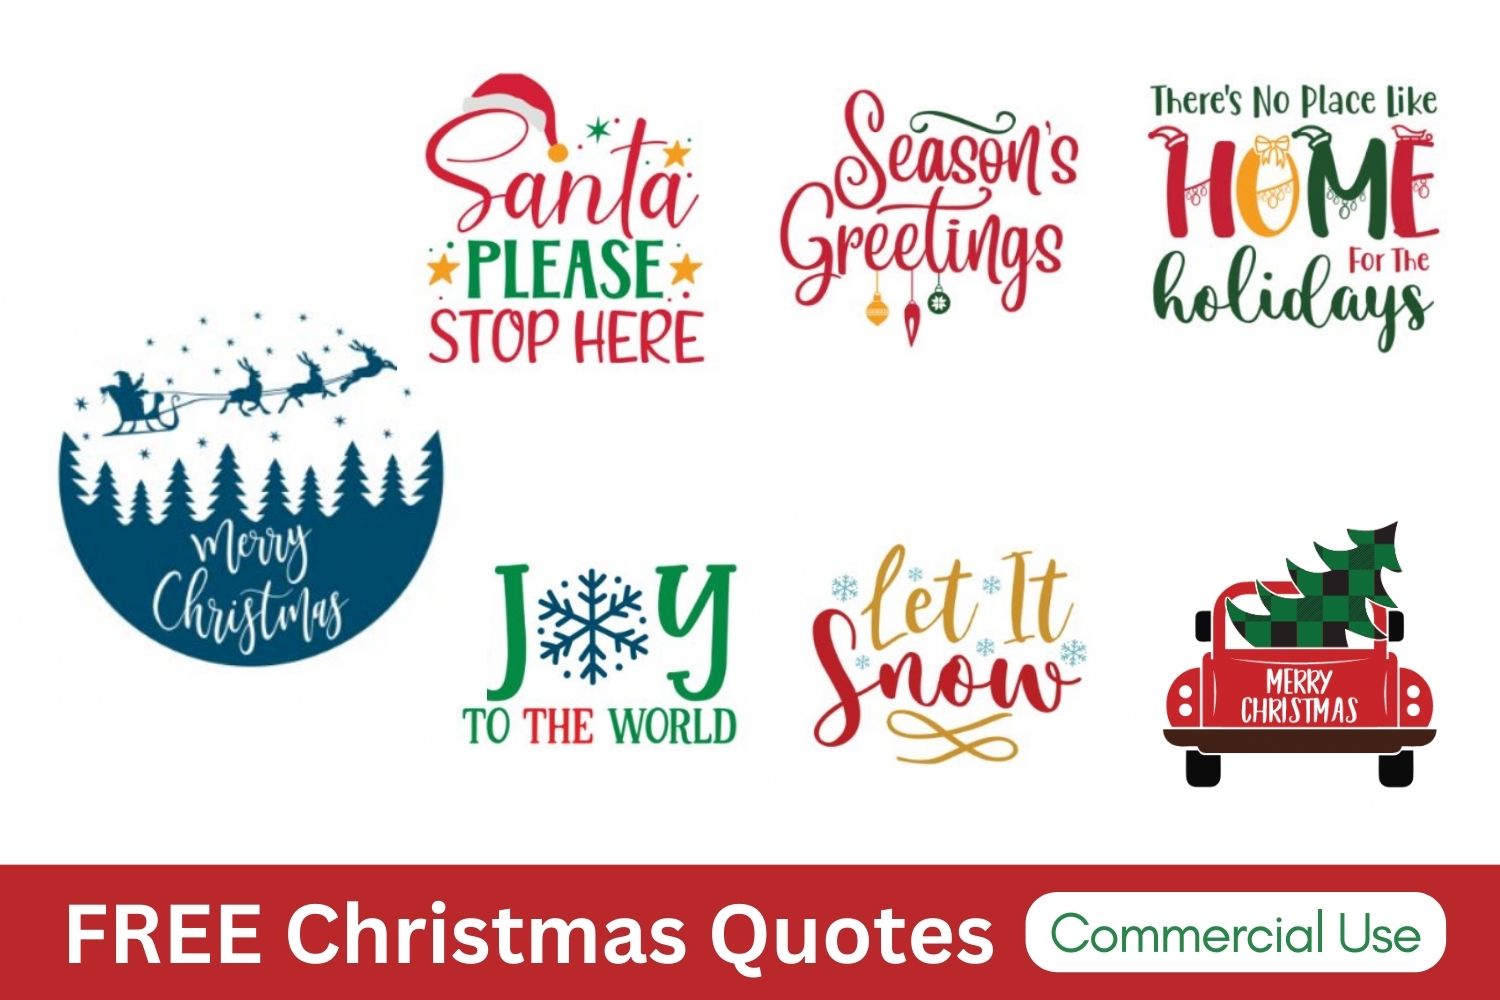 Christmas Sayings and Quotes SVG cricut silhouette laser cut free layered Christmas quotes, Christmas sayings, cricut designs, svg files, silhouette, winter, holidays, crafts, embroidery, bundle, cut files, vector,, card stock, glowforge, Clip Art, Funny Christmas.